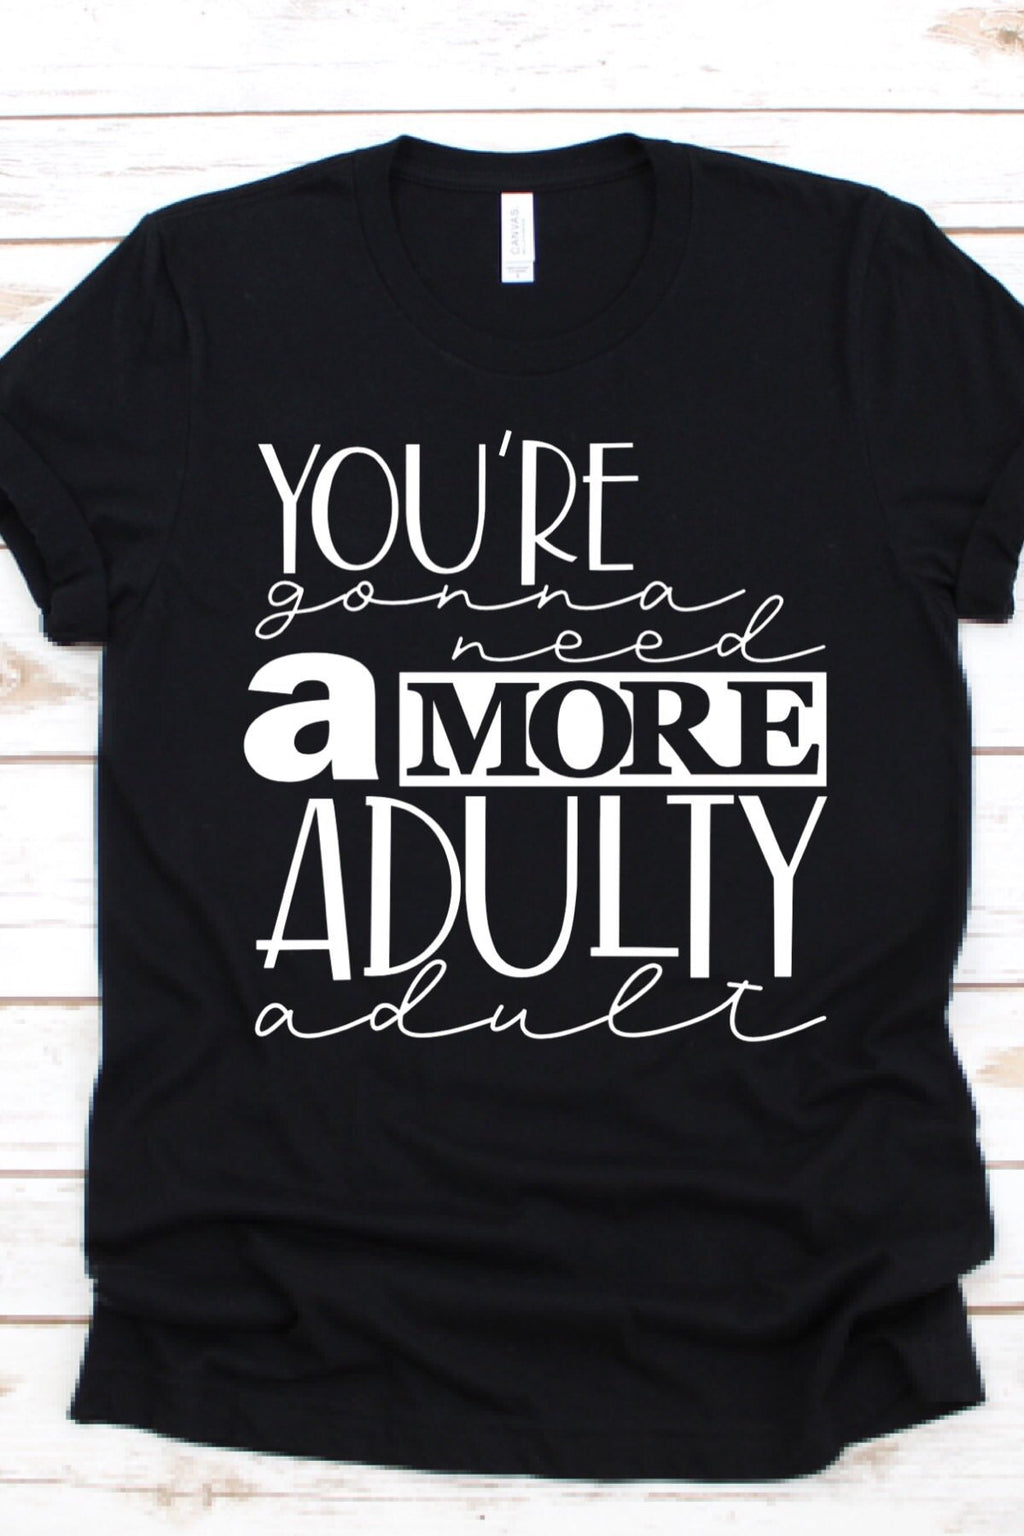 Adulty Adult